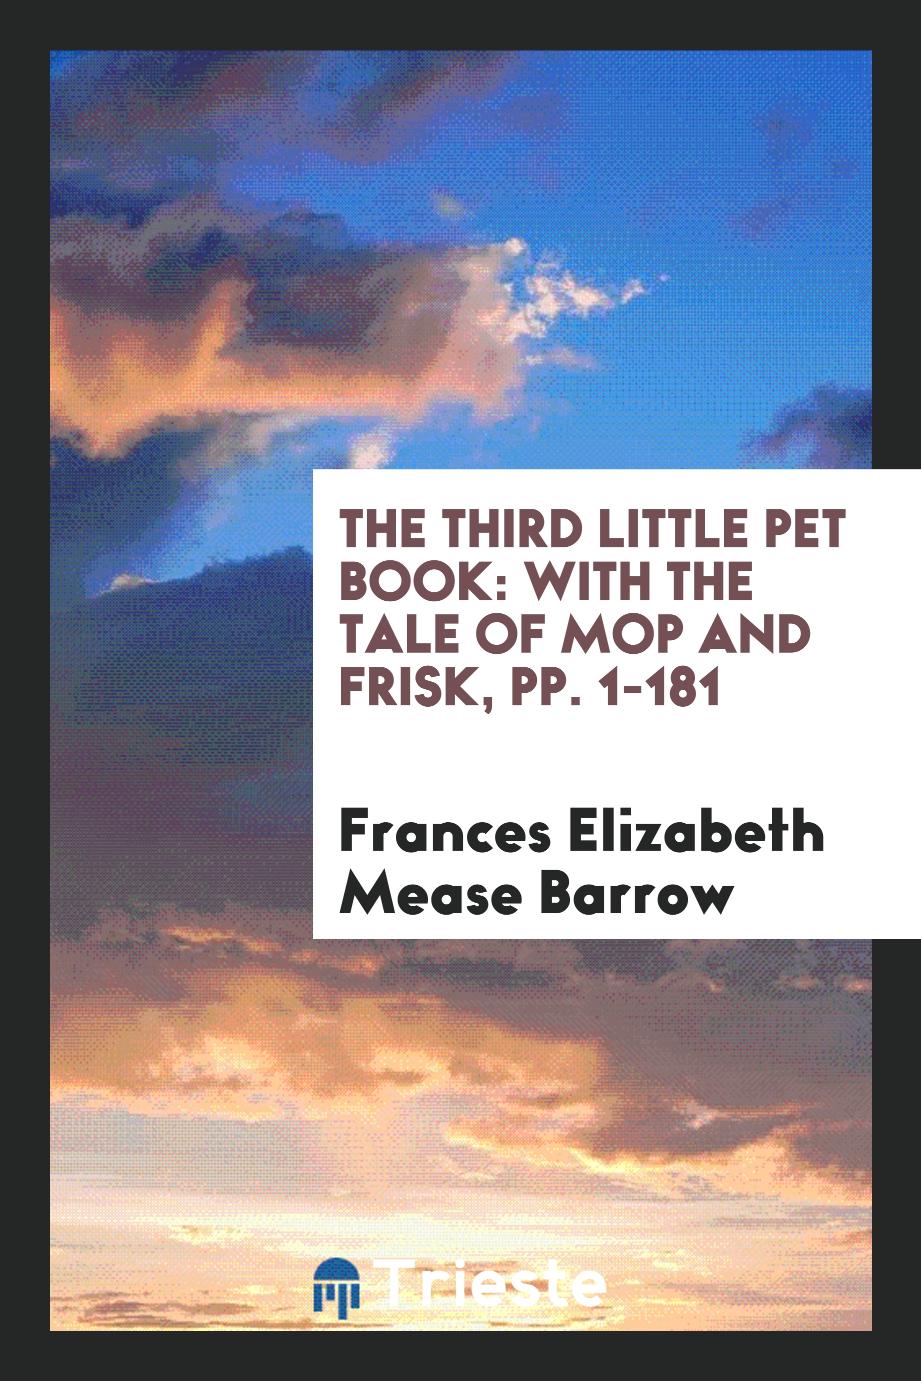 The Third Little Pet Book: With the Tale of Mop and Frisk, pp. 1-181